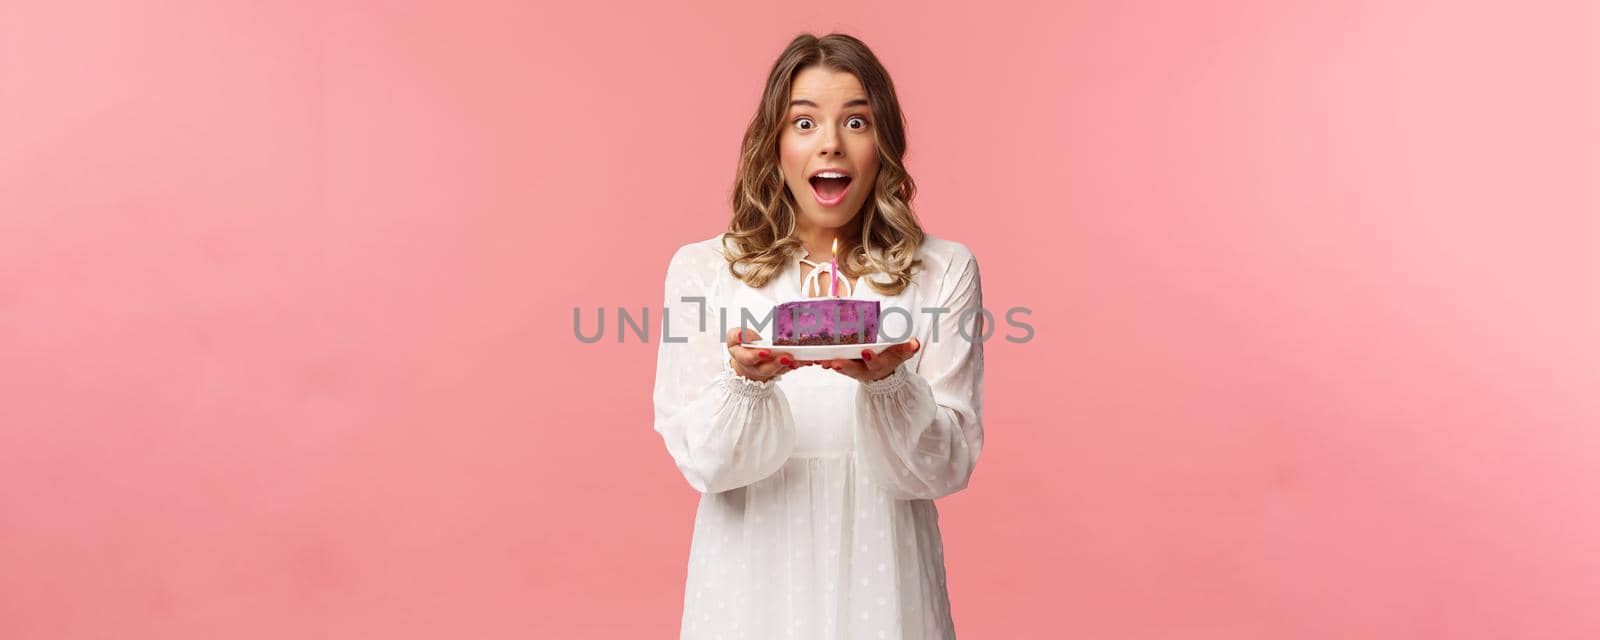 Holidays, spring and party concept. Happy cheerful good-looking blond woman celebrating birthday, holding piece cake with lit candle, making wish, look amused standing pink background.